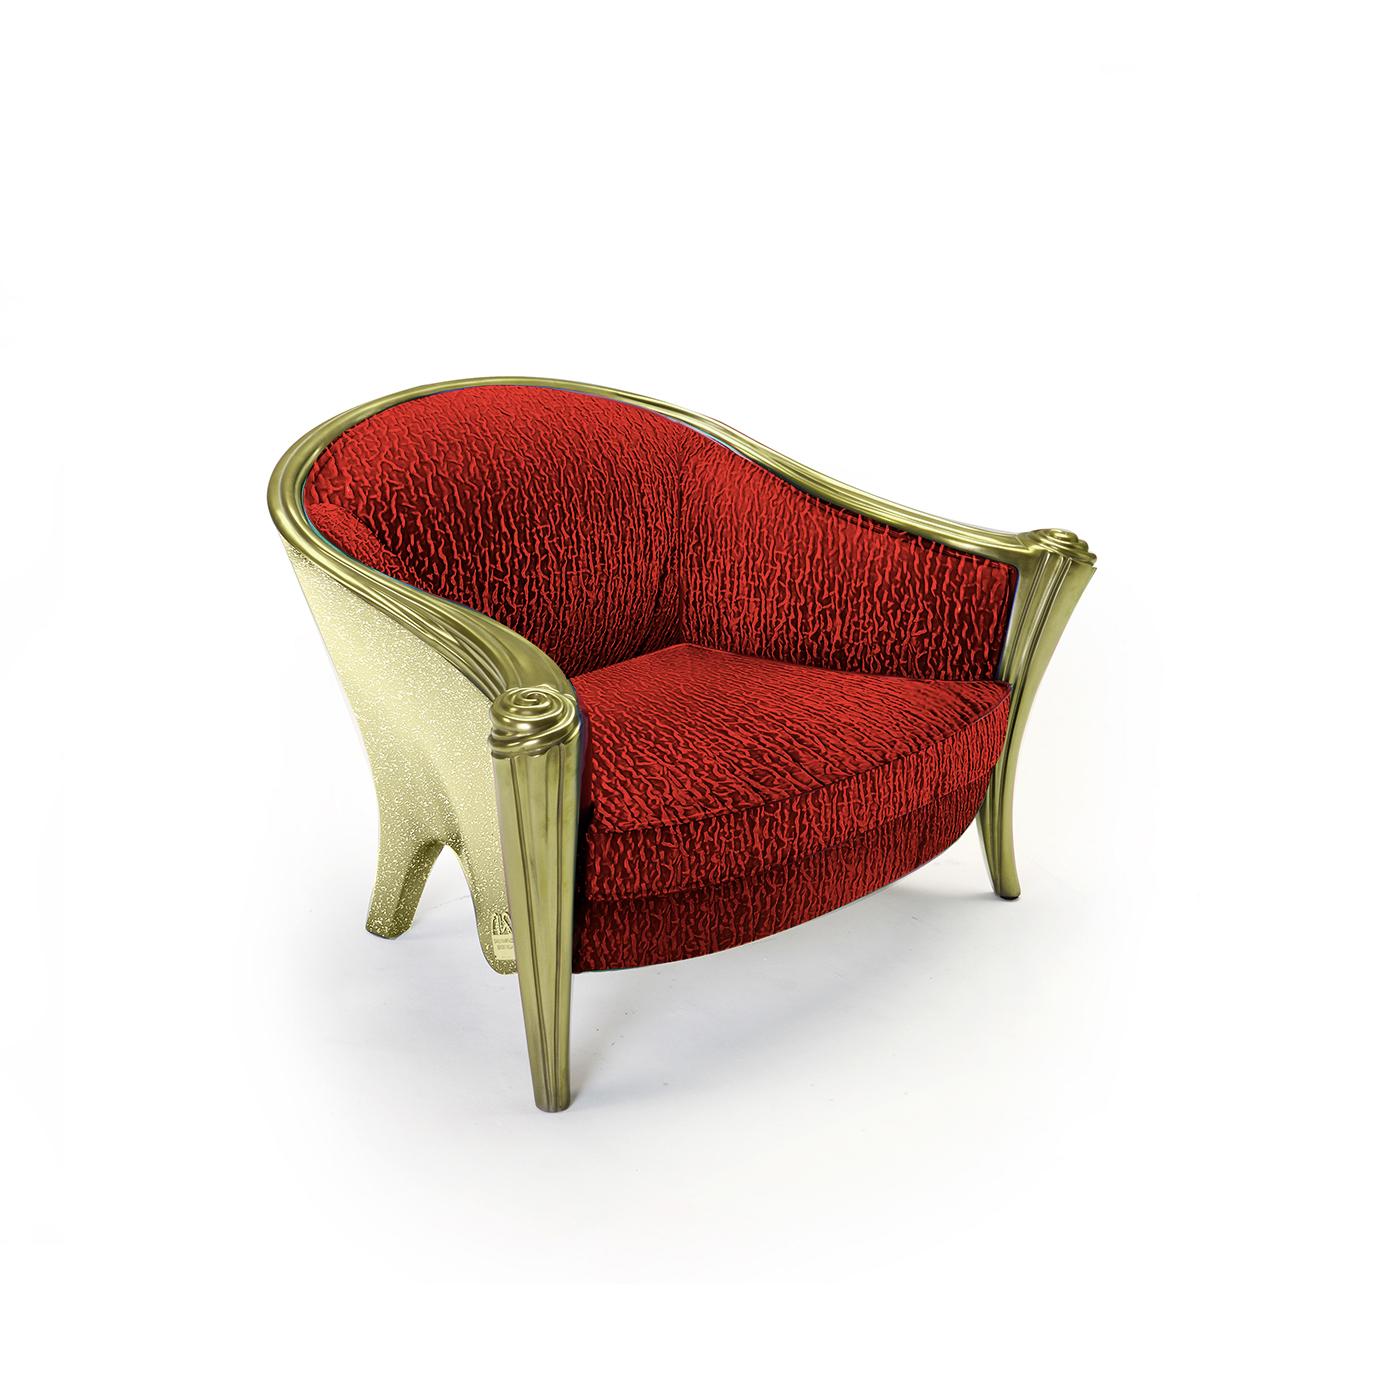 This lavish armchair from the Opus collection exudes sartorial appeal and glamorous style that will be the focal point of any room. Specially made for both children and pets alike, this small armchair is characterized by a sinuous silhouette, with